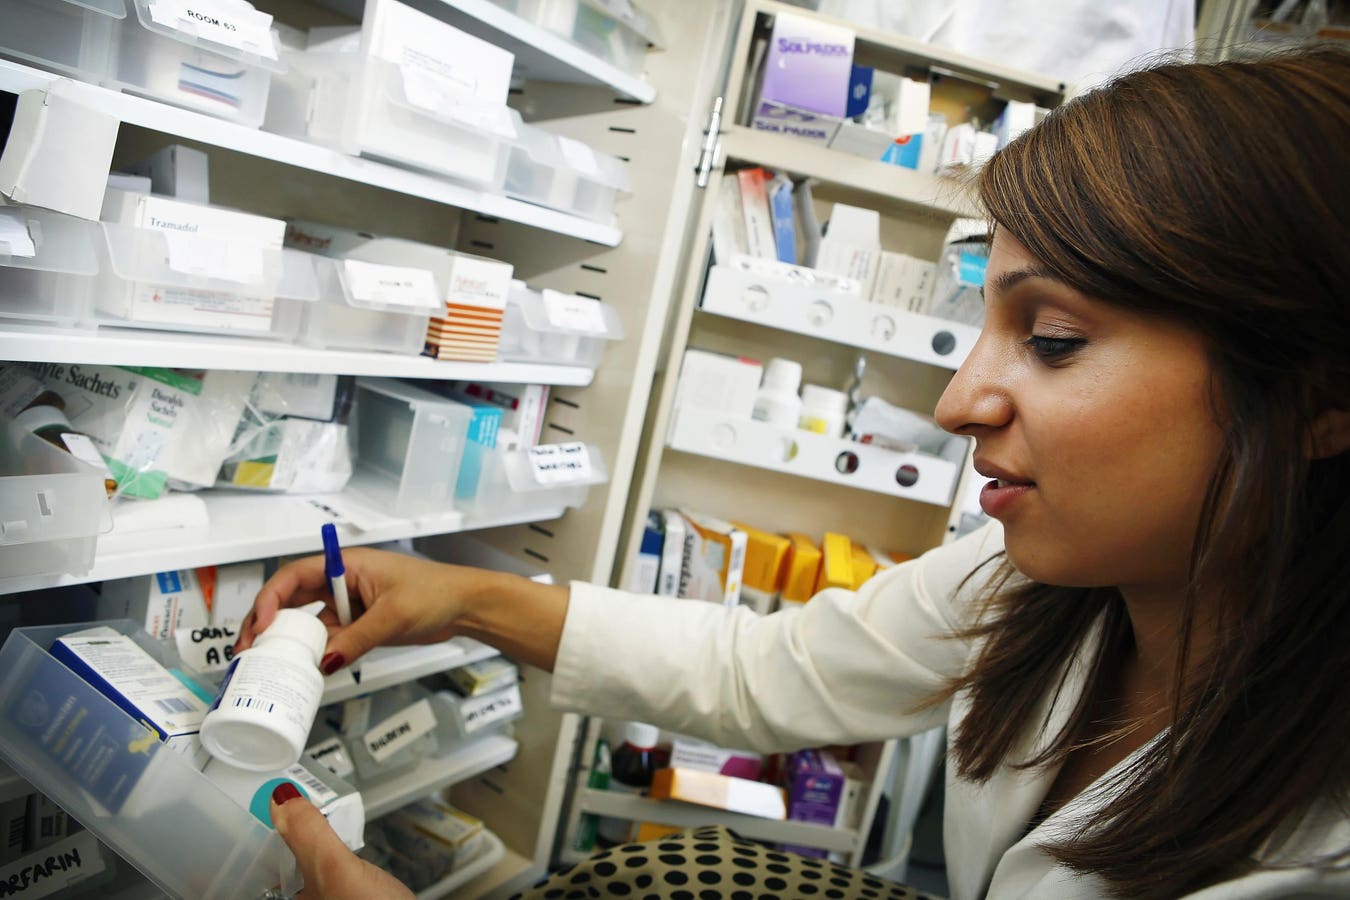 Daily struggle to find medicines amid shortages, say English pharmacists